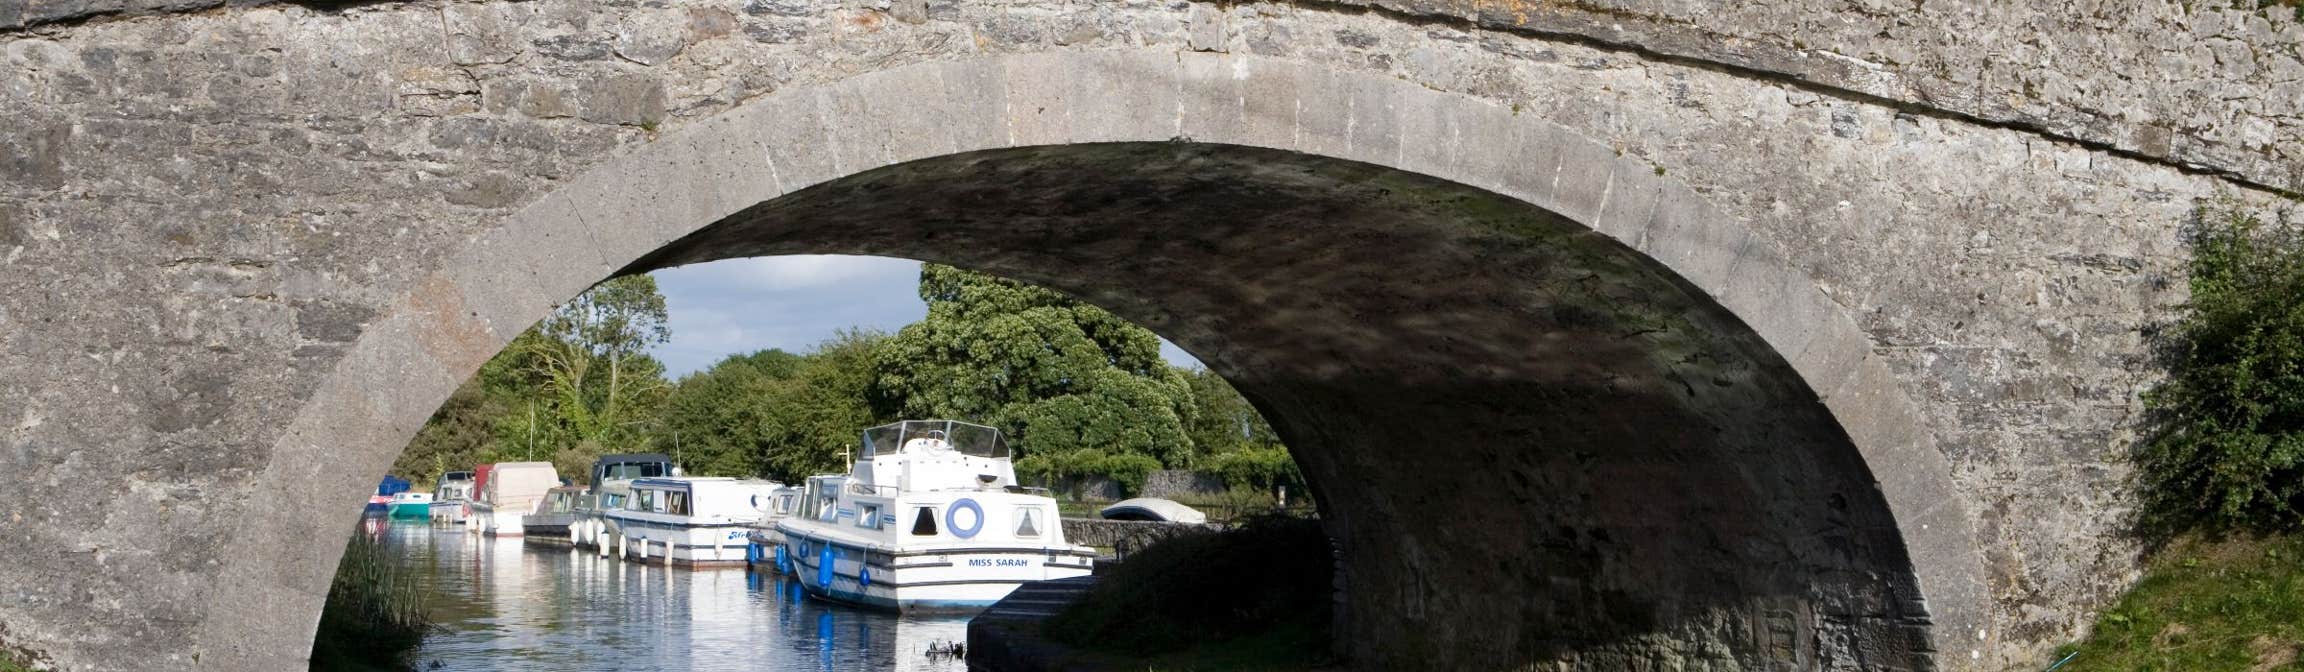 Image of a bridge over the river in Edenderry in County Offaly